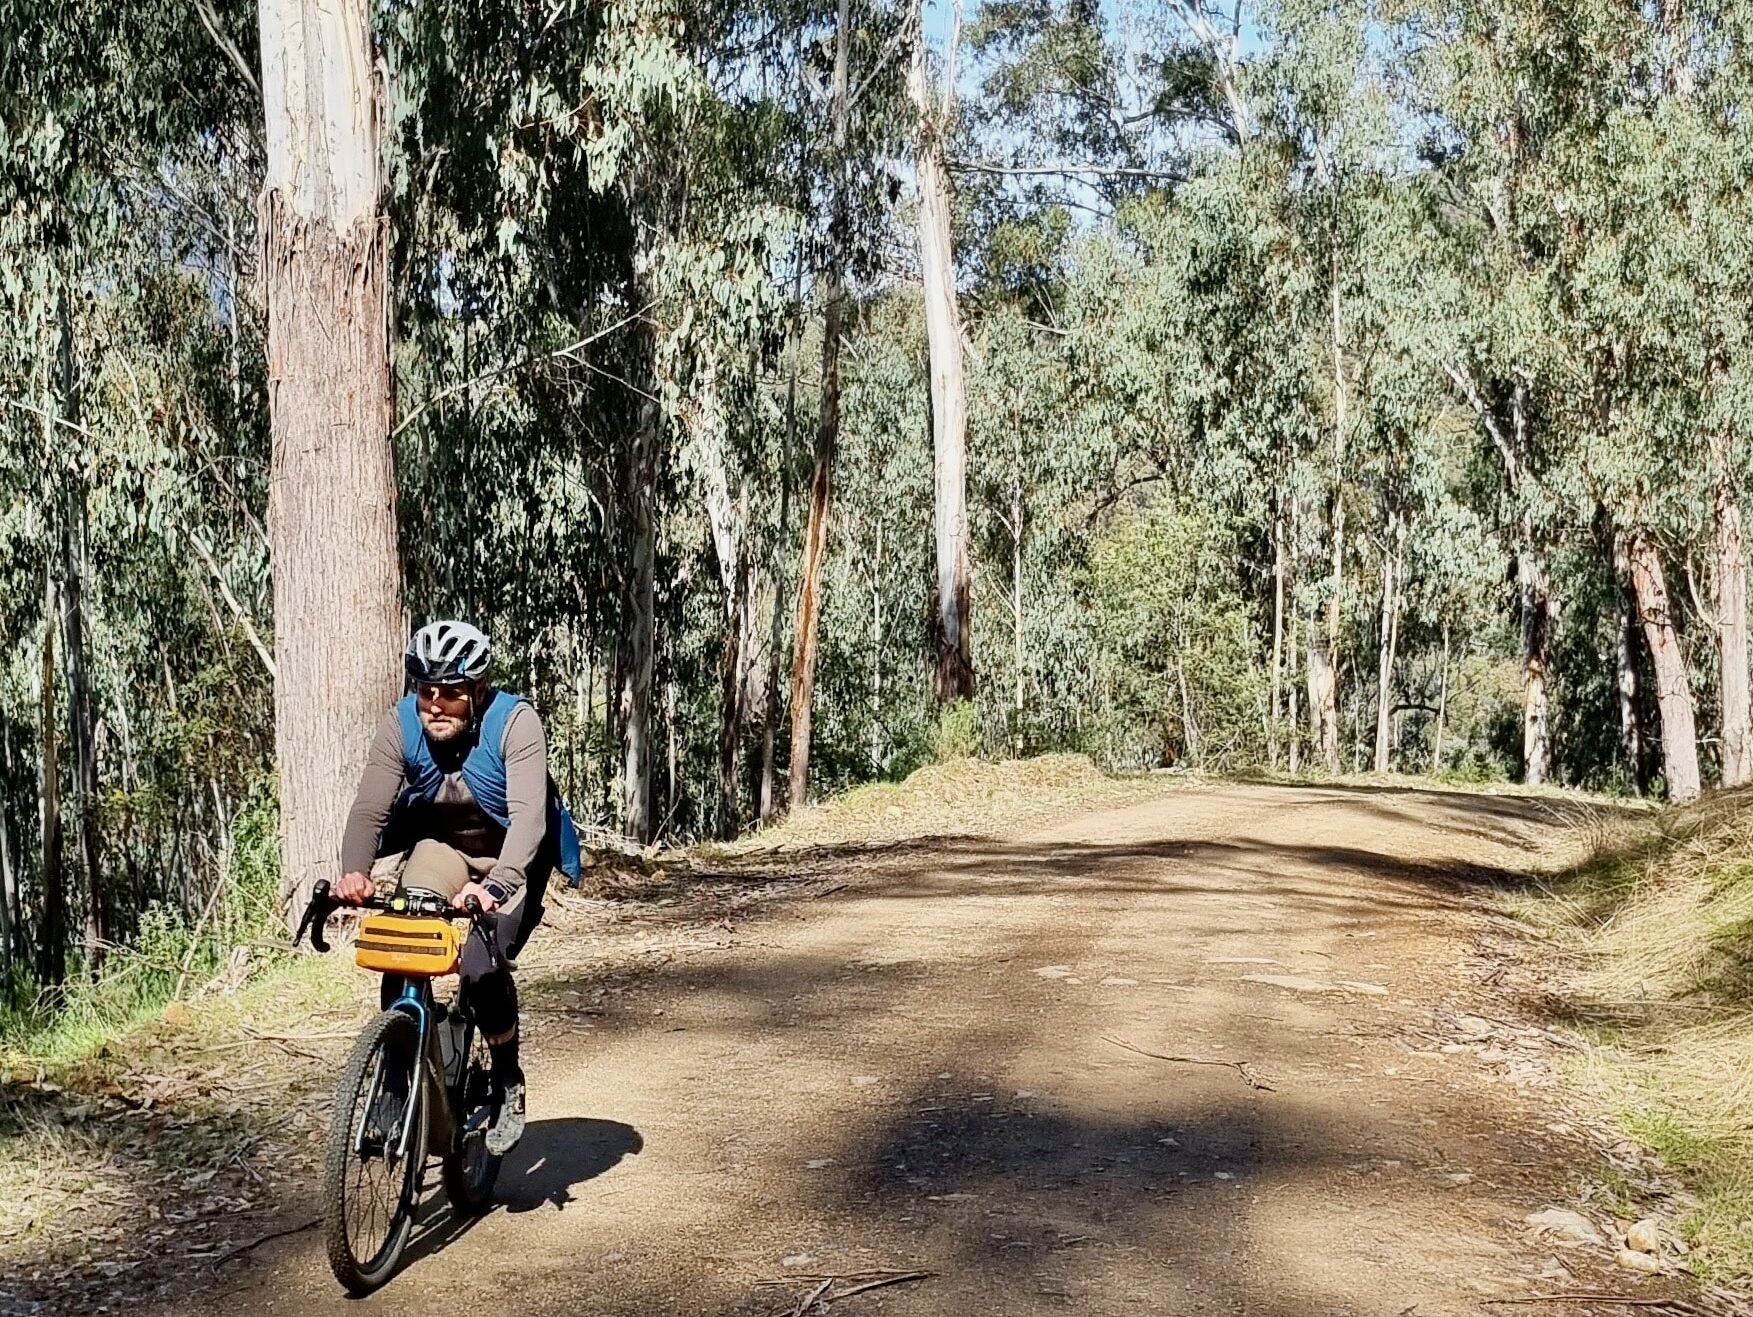 Cyclist pedaling up a winding gravel road through native forest on a sunny day